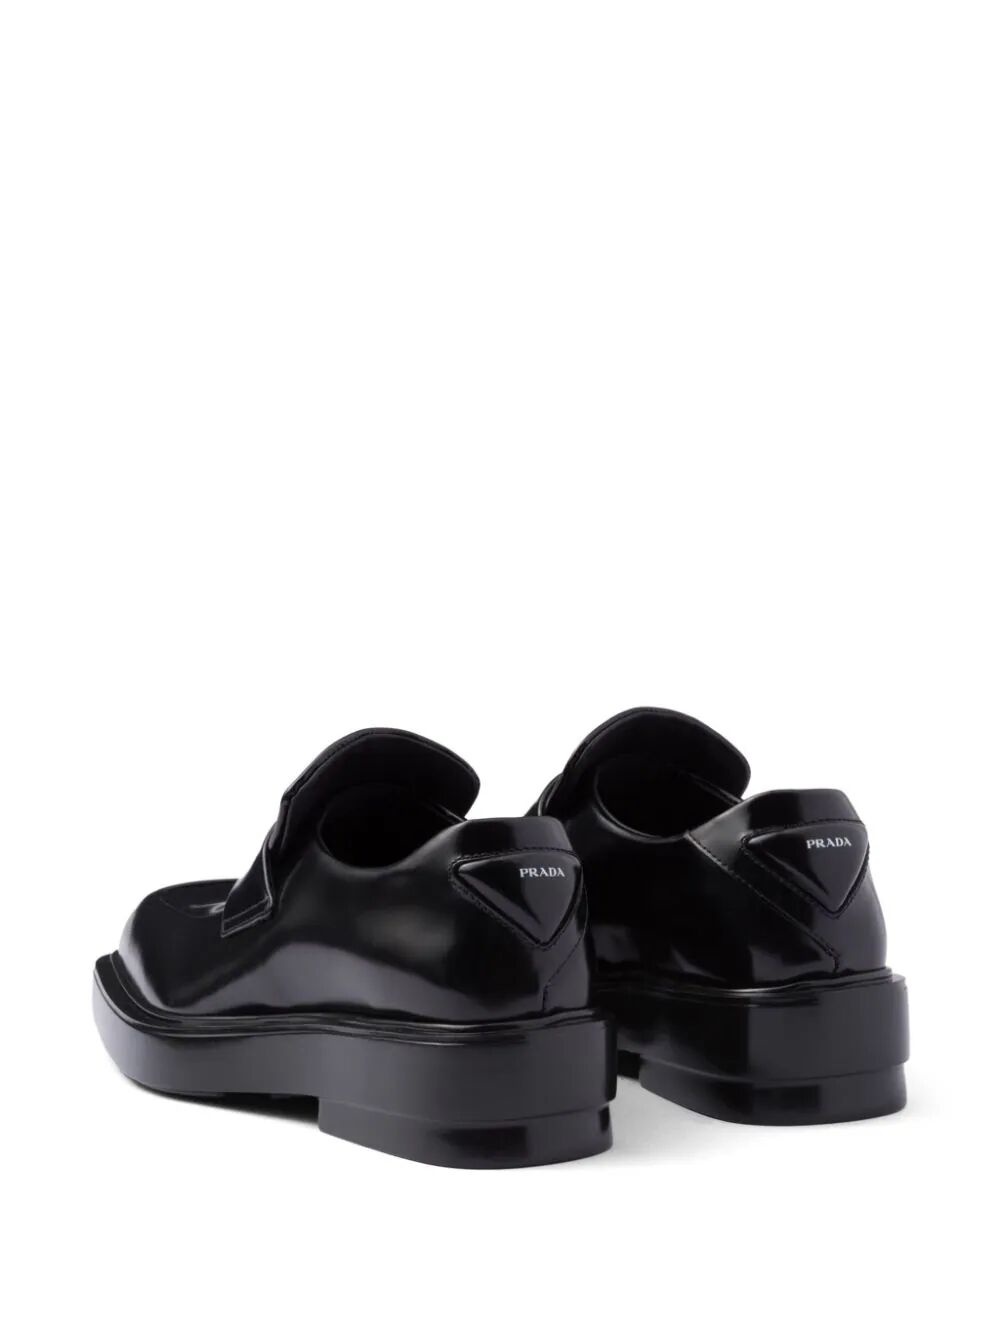 PRADA FENDER SQUARE LEATHER LOAFERS - 20